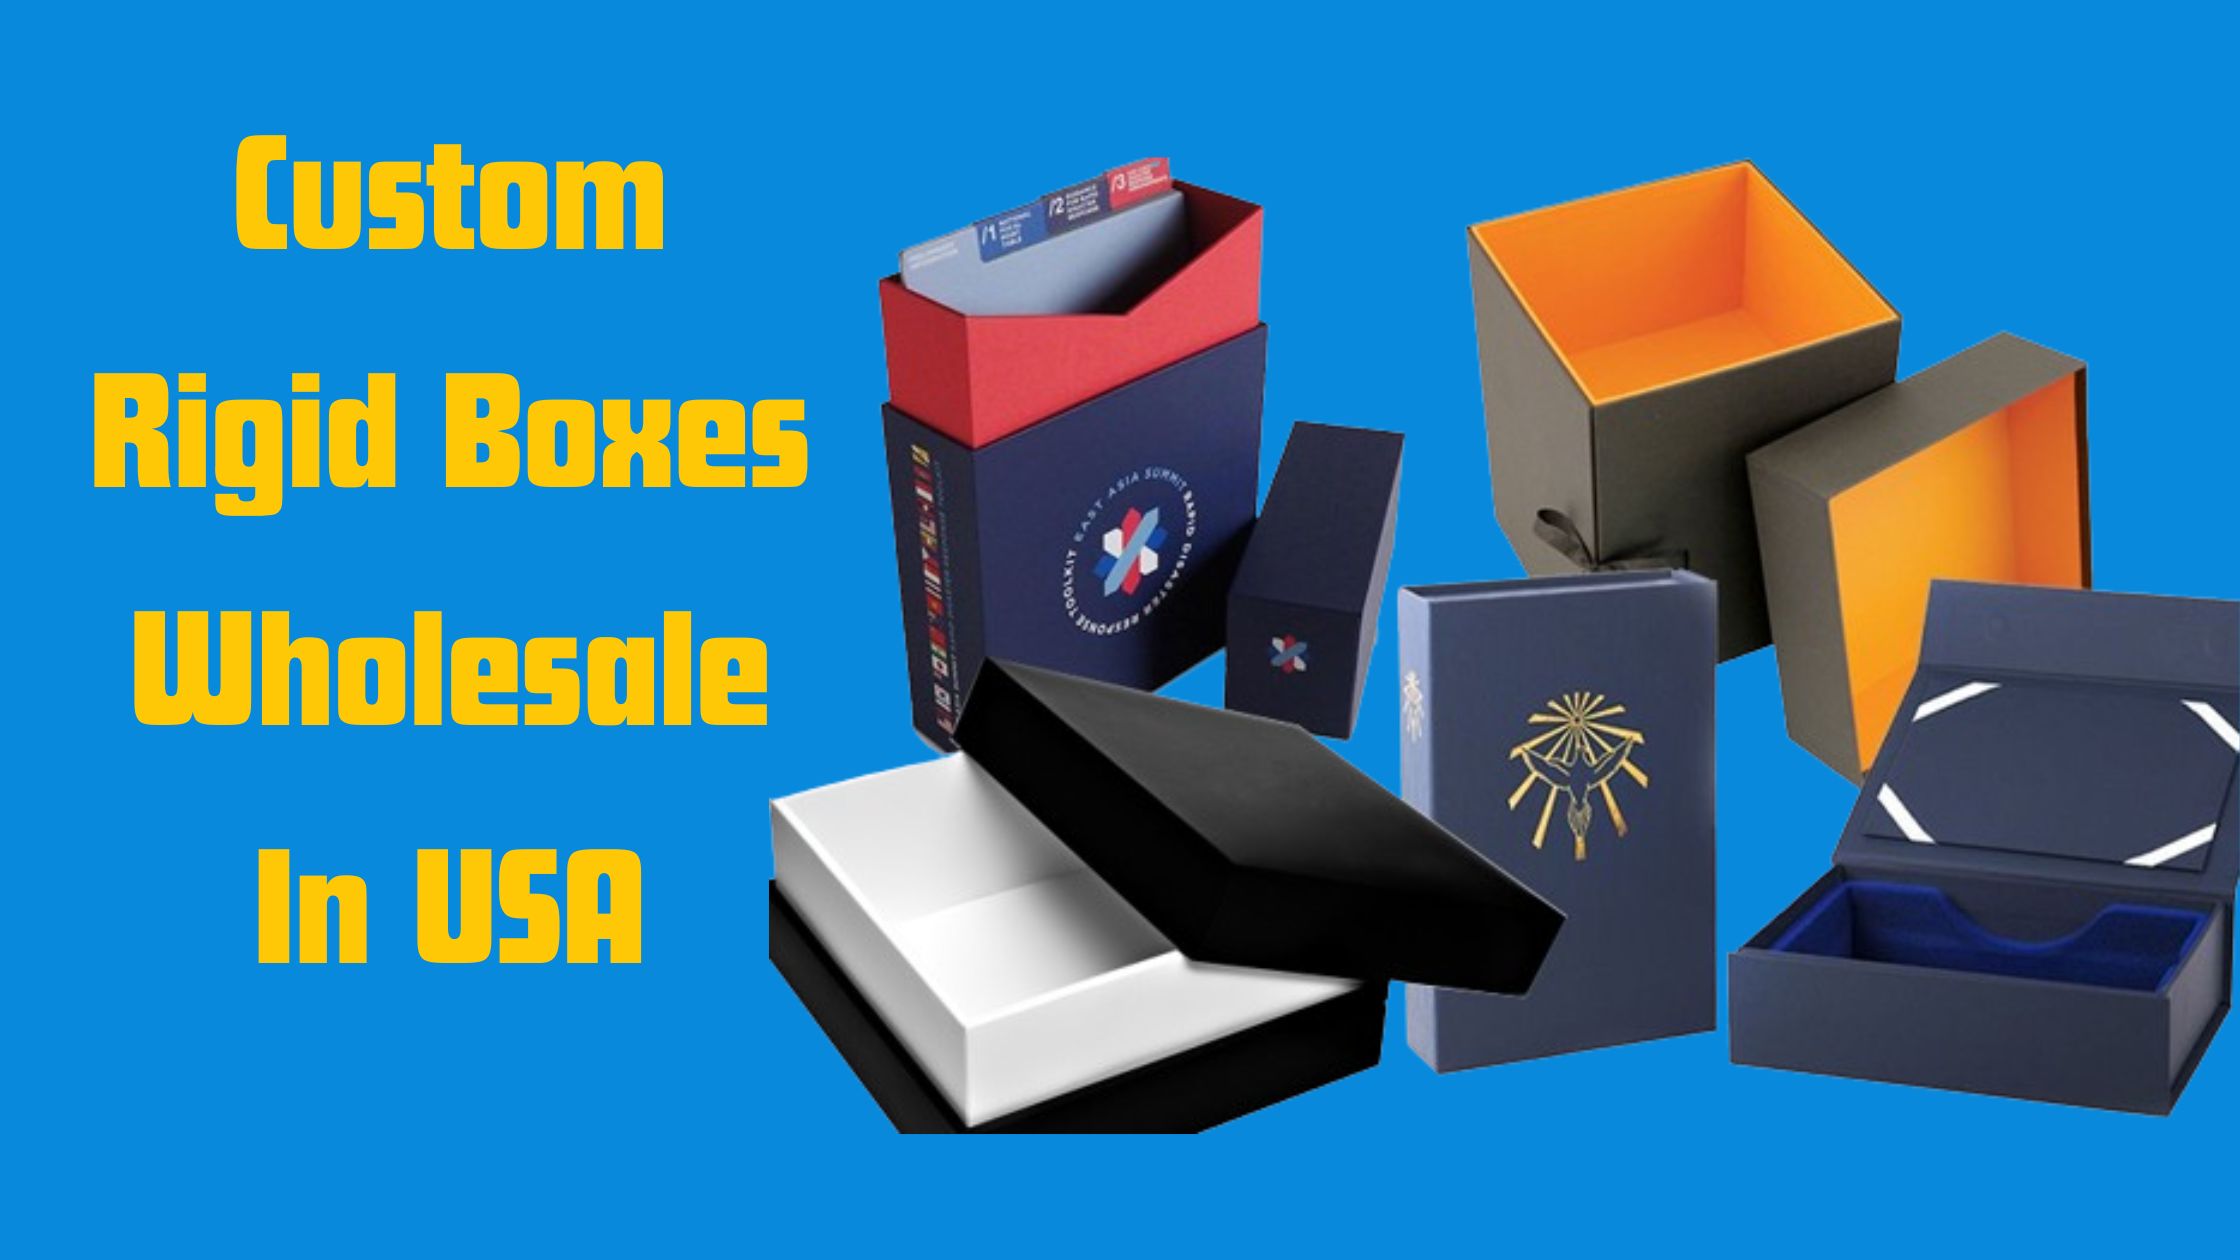 What Are The Key Features Of Custom Printed Rigid Boxes?